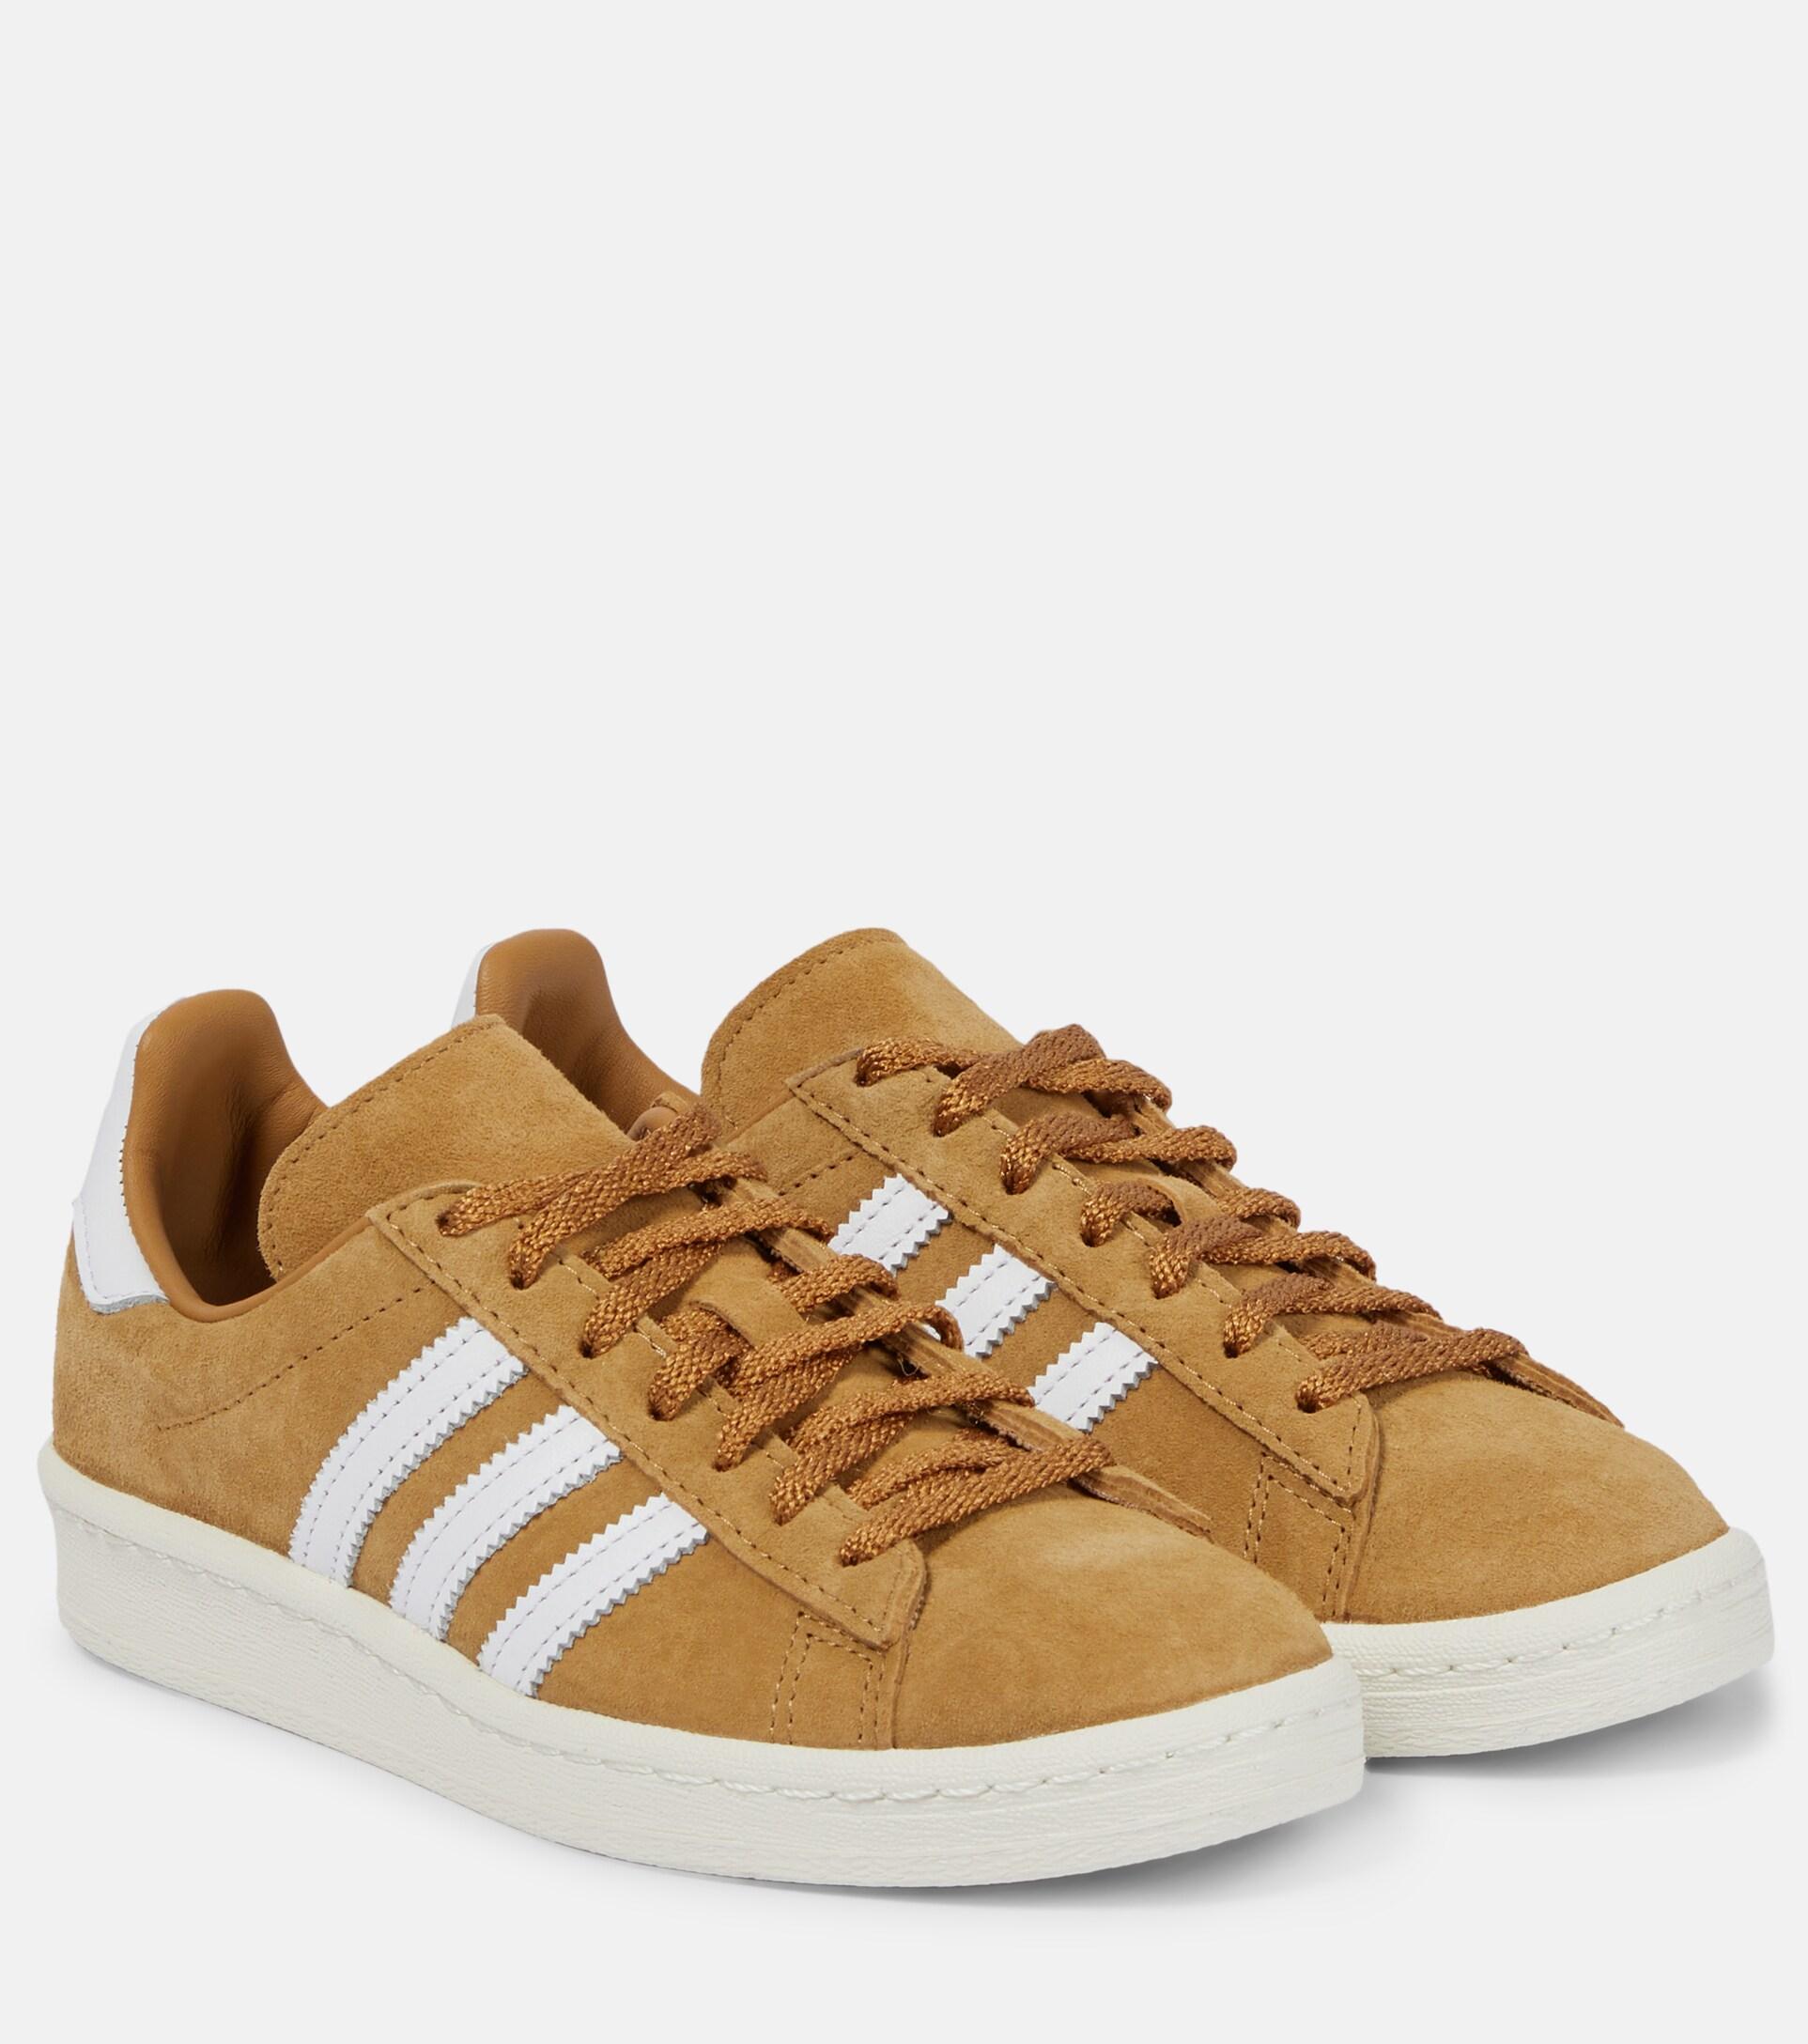 adidas Campus 80s Suede Sneakers in Brown | Lyst